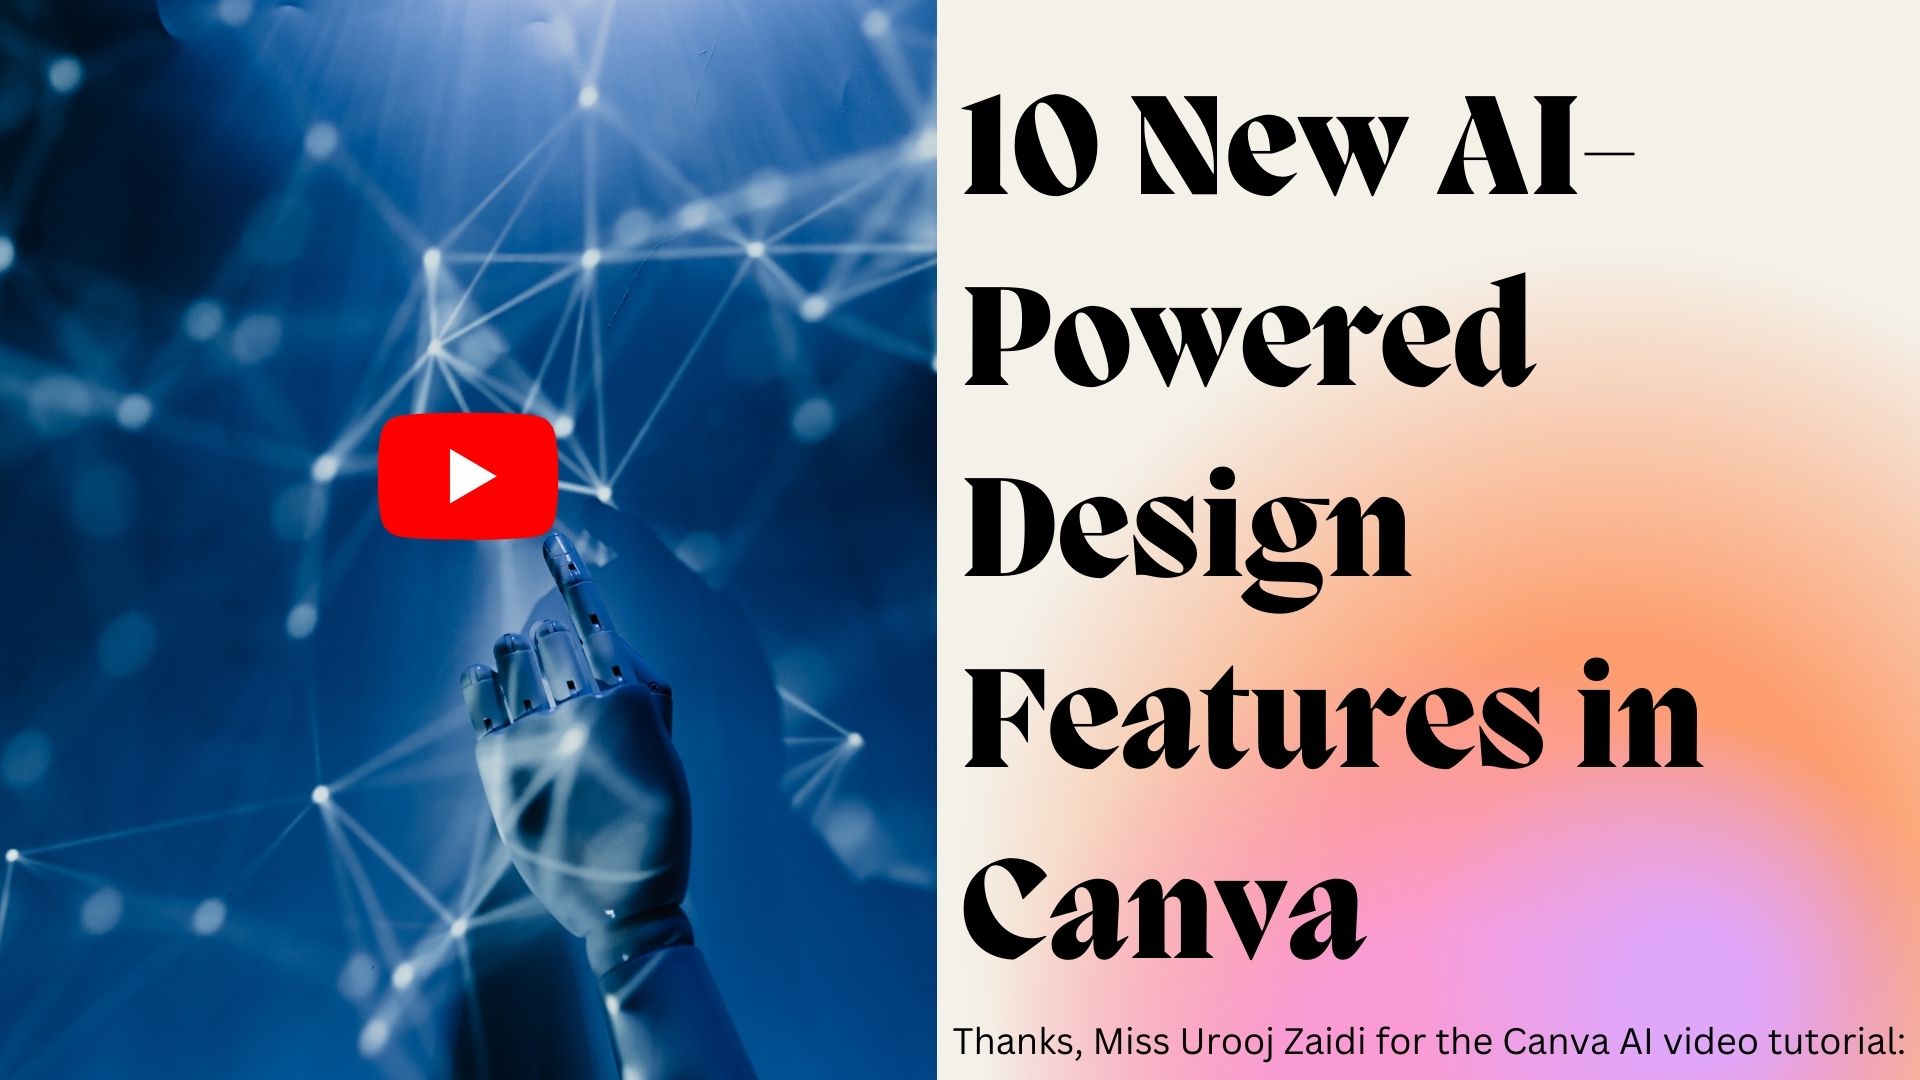 10 New AI-Powered Design Features in Canva